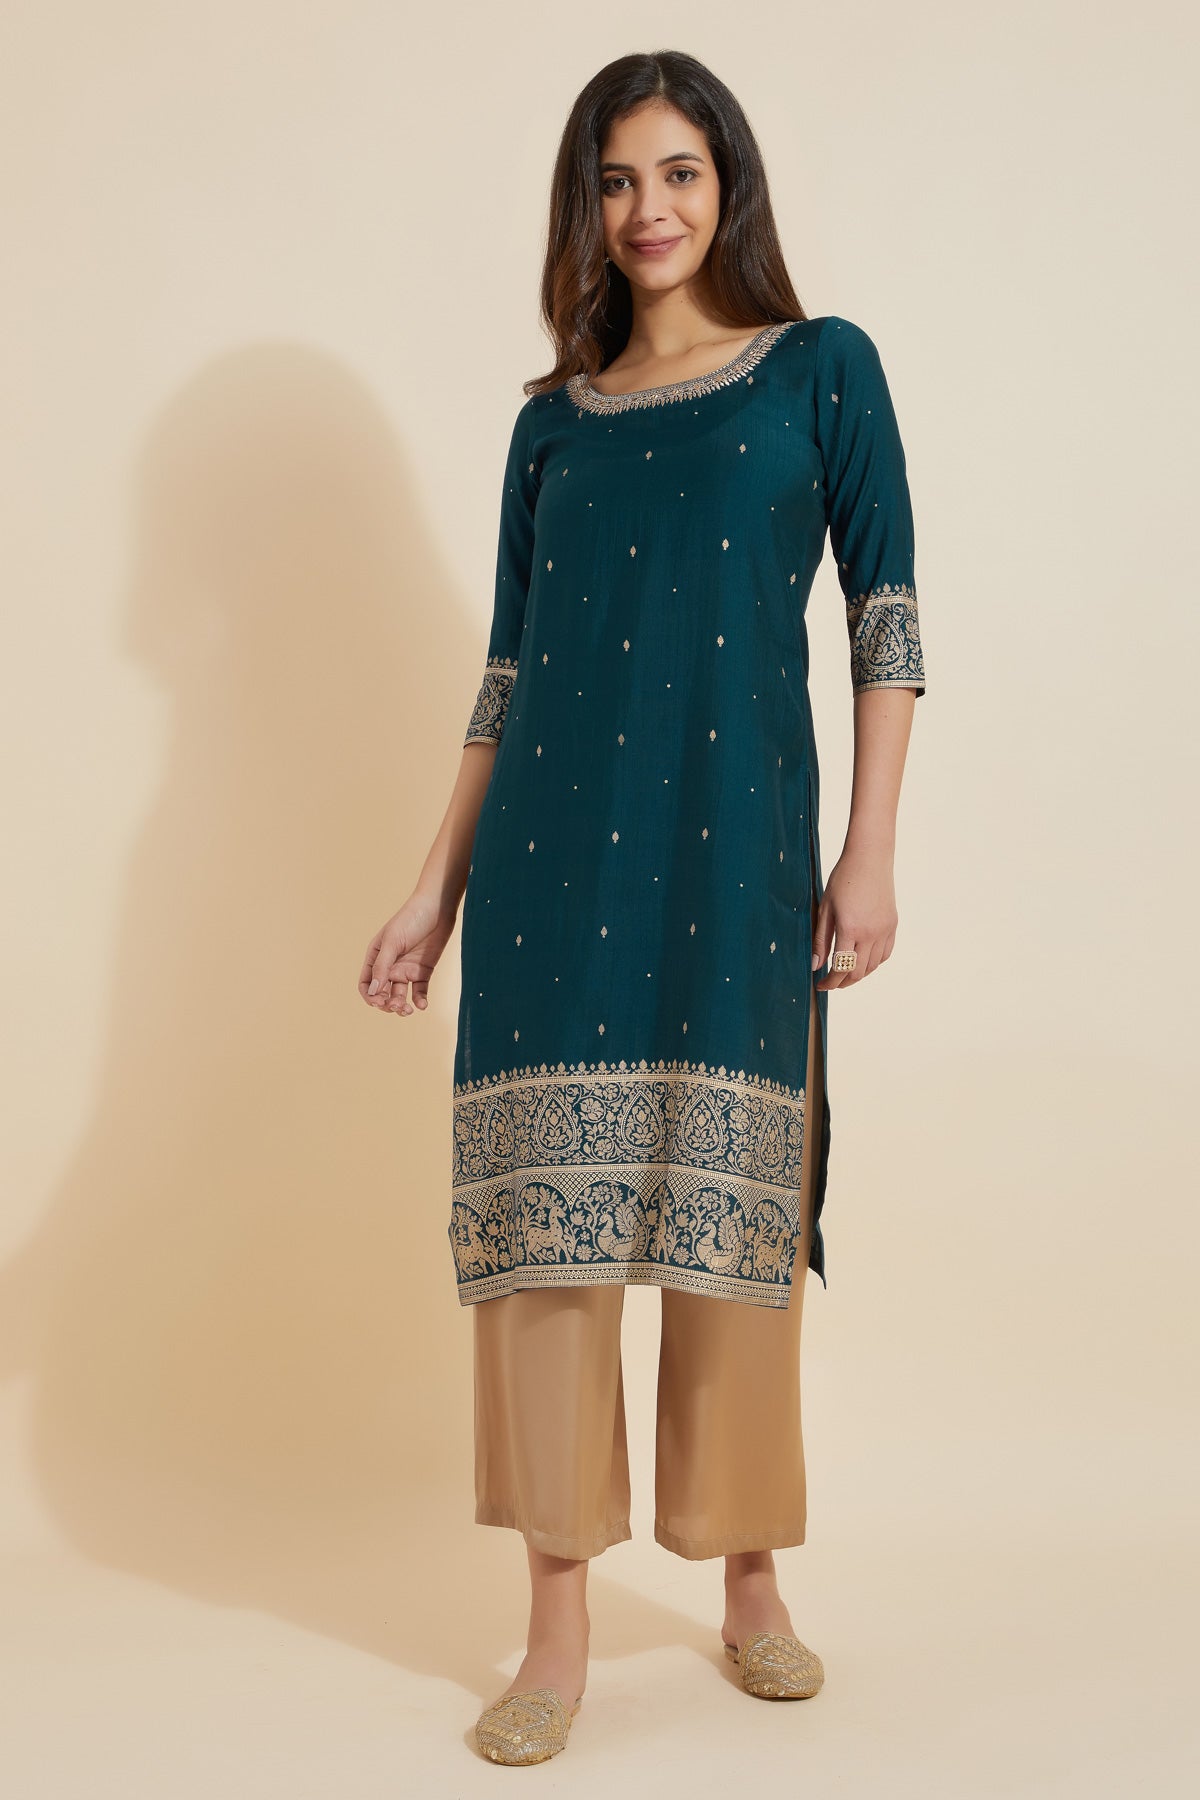 Jewel Inspired Embroidered Neckline With Contemporary Printed Border - Blue